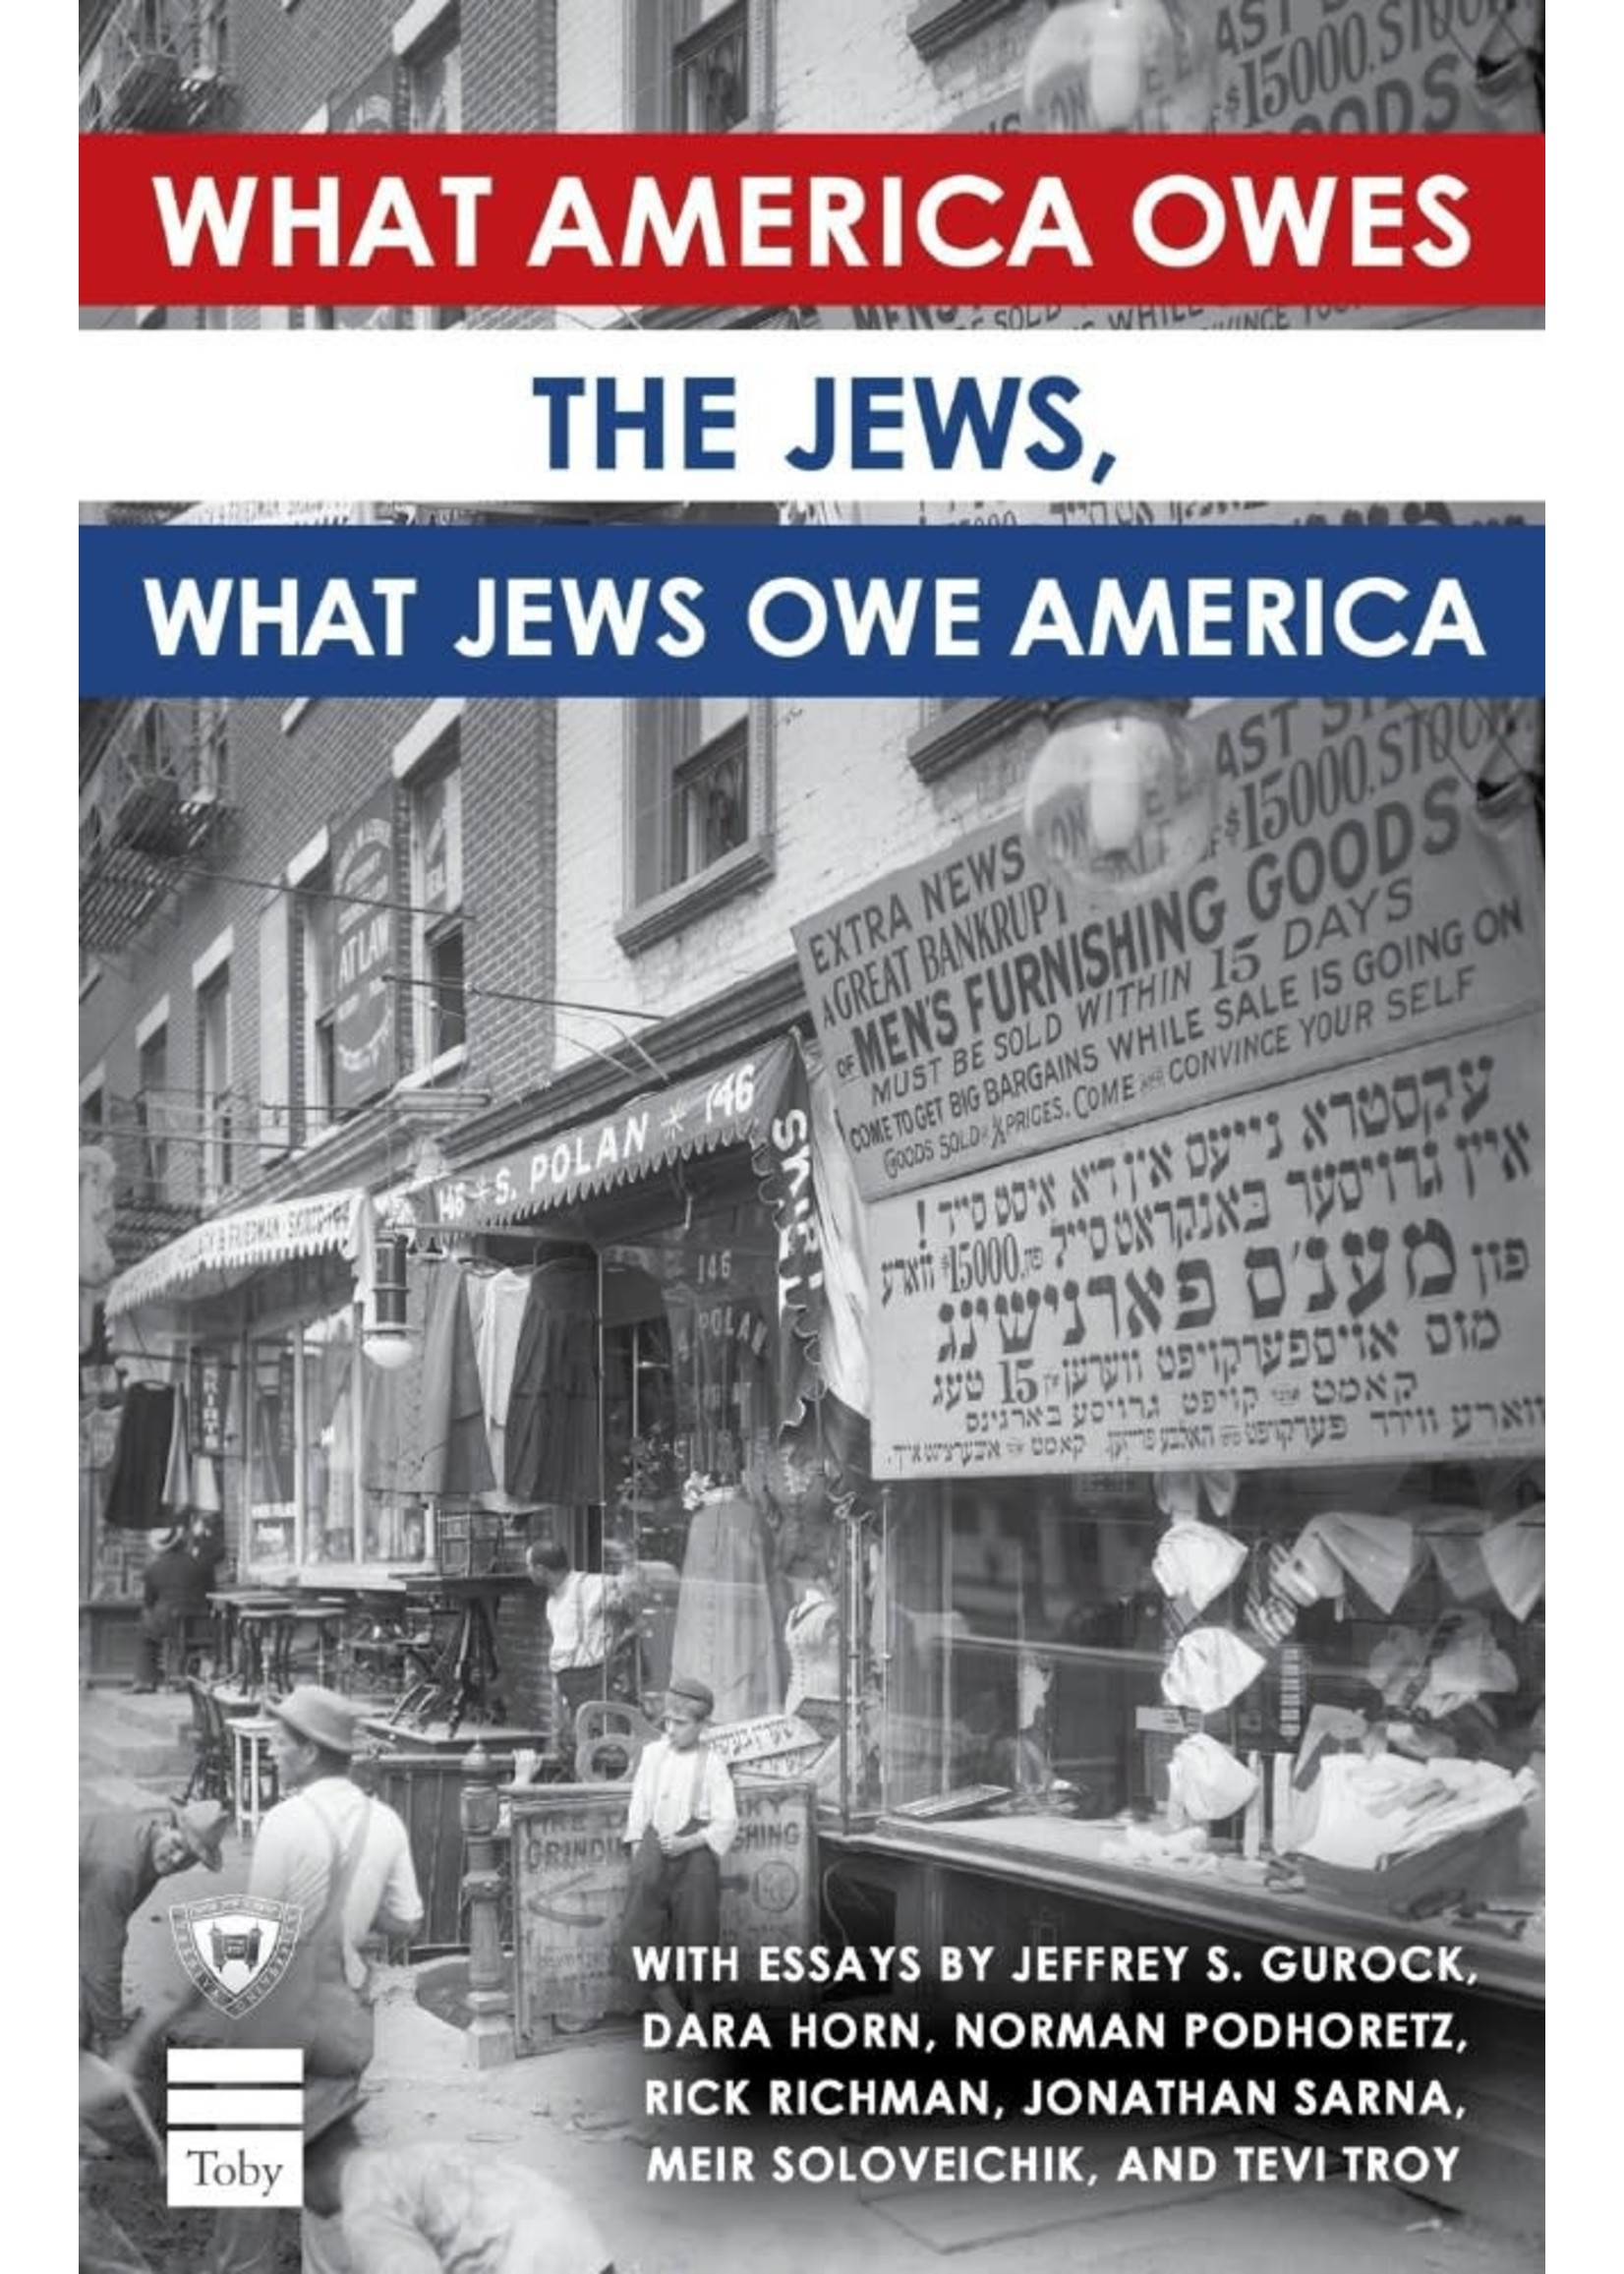 WHAT AMERICA OWES THE JEWS